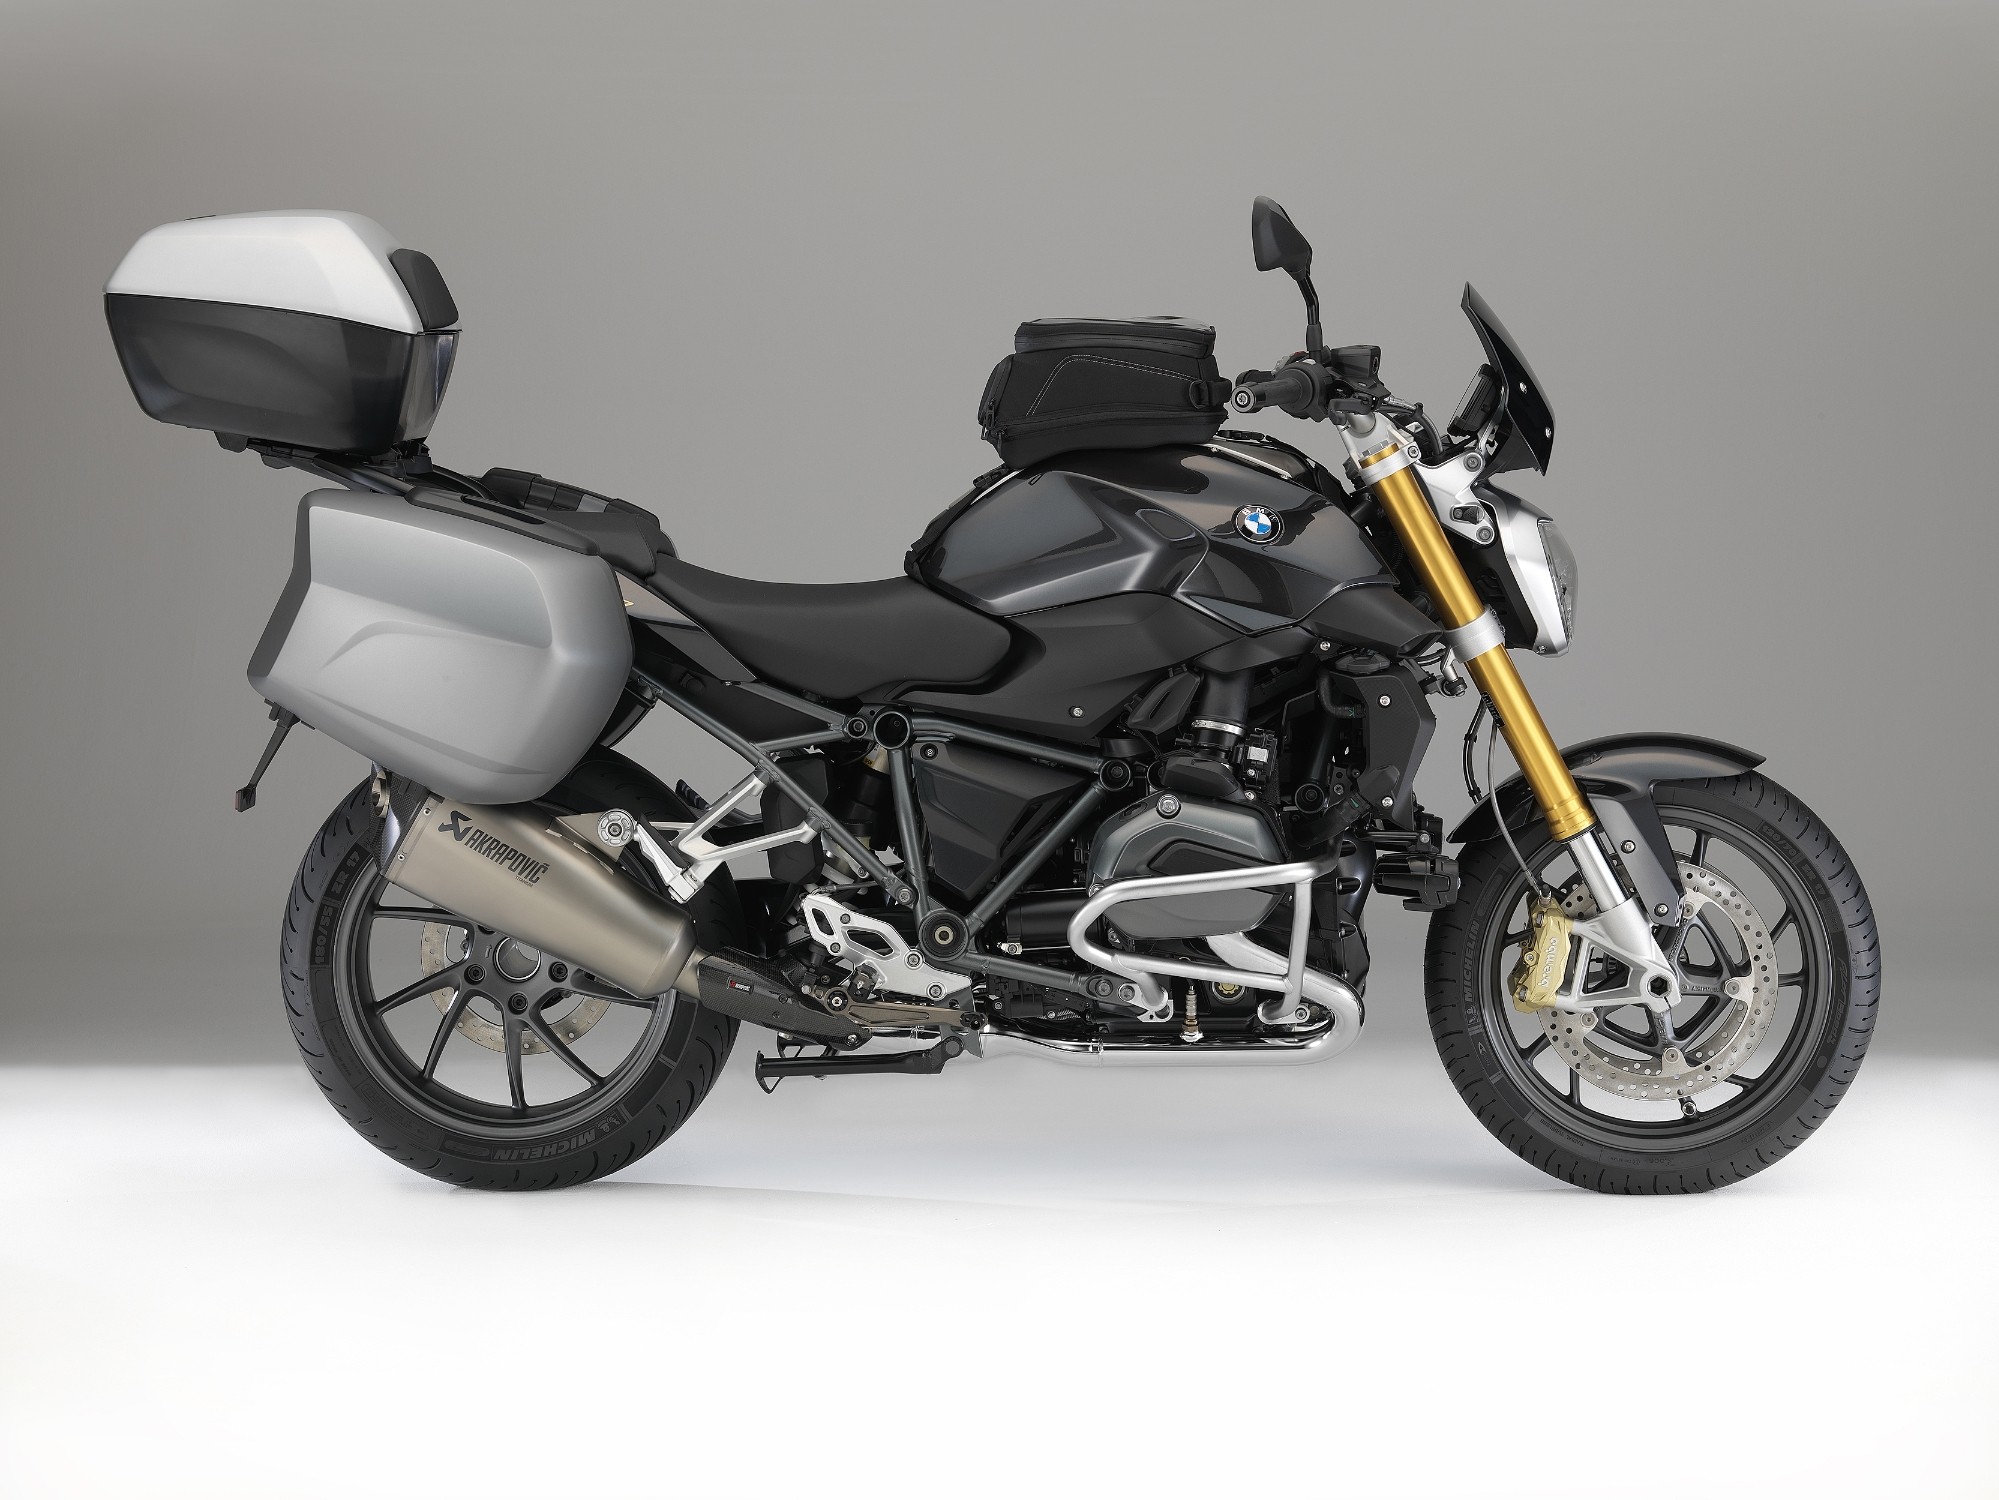 BMW R 1200 R with special accessories: panniers and topcas small incl. luggage Akrapović Sport silencer; footrests, milled, adjustable; crash bars; auxiliary headlights; tank bag small, Navigator V, windscreen Sport,